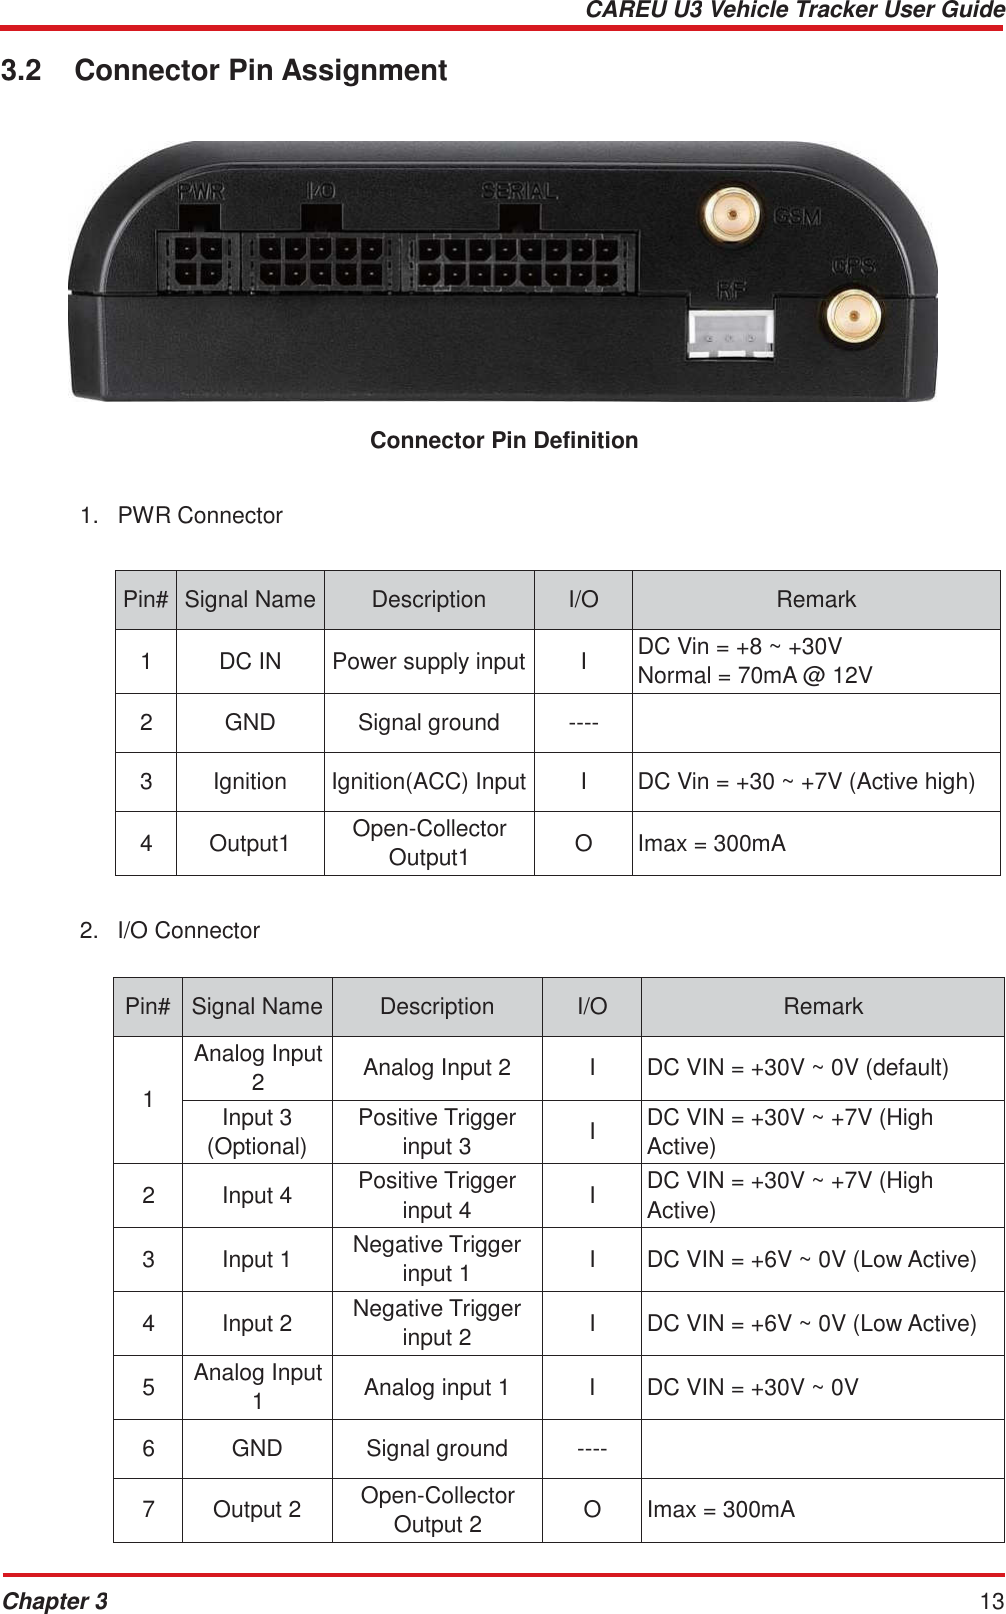 CAREU U3 Vehicle Tracker User Guide Chapter 3 13   1  3 1  3 5 7  9 1  3  5  7  9 11 13 15 2  4 2  4 6 8 10 2  4  6  8 101214 16  3.2  Connector Pin Assignment      Connector Pin Definition   1.   PWR Connector    Pin#  Signal Name  Description  I/O  Remark  1  DC IN  Power supply input  I DC Vin = +8 ~ +30V Normal = 70mA @ 12V  2  GND  Signal ground  ----   3  Ignition  Ignition(ACC) Input  I  DC Vin = +30 ~ +7V (Active high)  4  Output1 Open-Collector Output1  O  Imax = 300mA   2.   I/O Connector    Pin#  Signal Name  Description  I/O  Remark Analog Input 2  Analog Input 2  I  DC VIN = +30V ~ 0V (default)   1 Input 3 (Optional) Positive Trigger input 3  I DC VIN = +30V ~ +7V (High Active)  2  Input 4 Positive Trigger input 4  I DC VIN = +30V ~ +7V (High Active)  3  Input 1 Negative Trigger input 1  I  DC VIN = +6V ~ 0V (Low Active)  4  Input 2 Negative Trigger input 2  I  DC VIN = +6V ~ 0V (Low Active)  5 Analog Input 1  Analog input 1  I  DC VIN = +30V ~ 0V  6  GND  Signal ground  ----   7  Output 2 Open-Collector Output 2  O  Imax = 300mA 